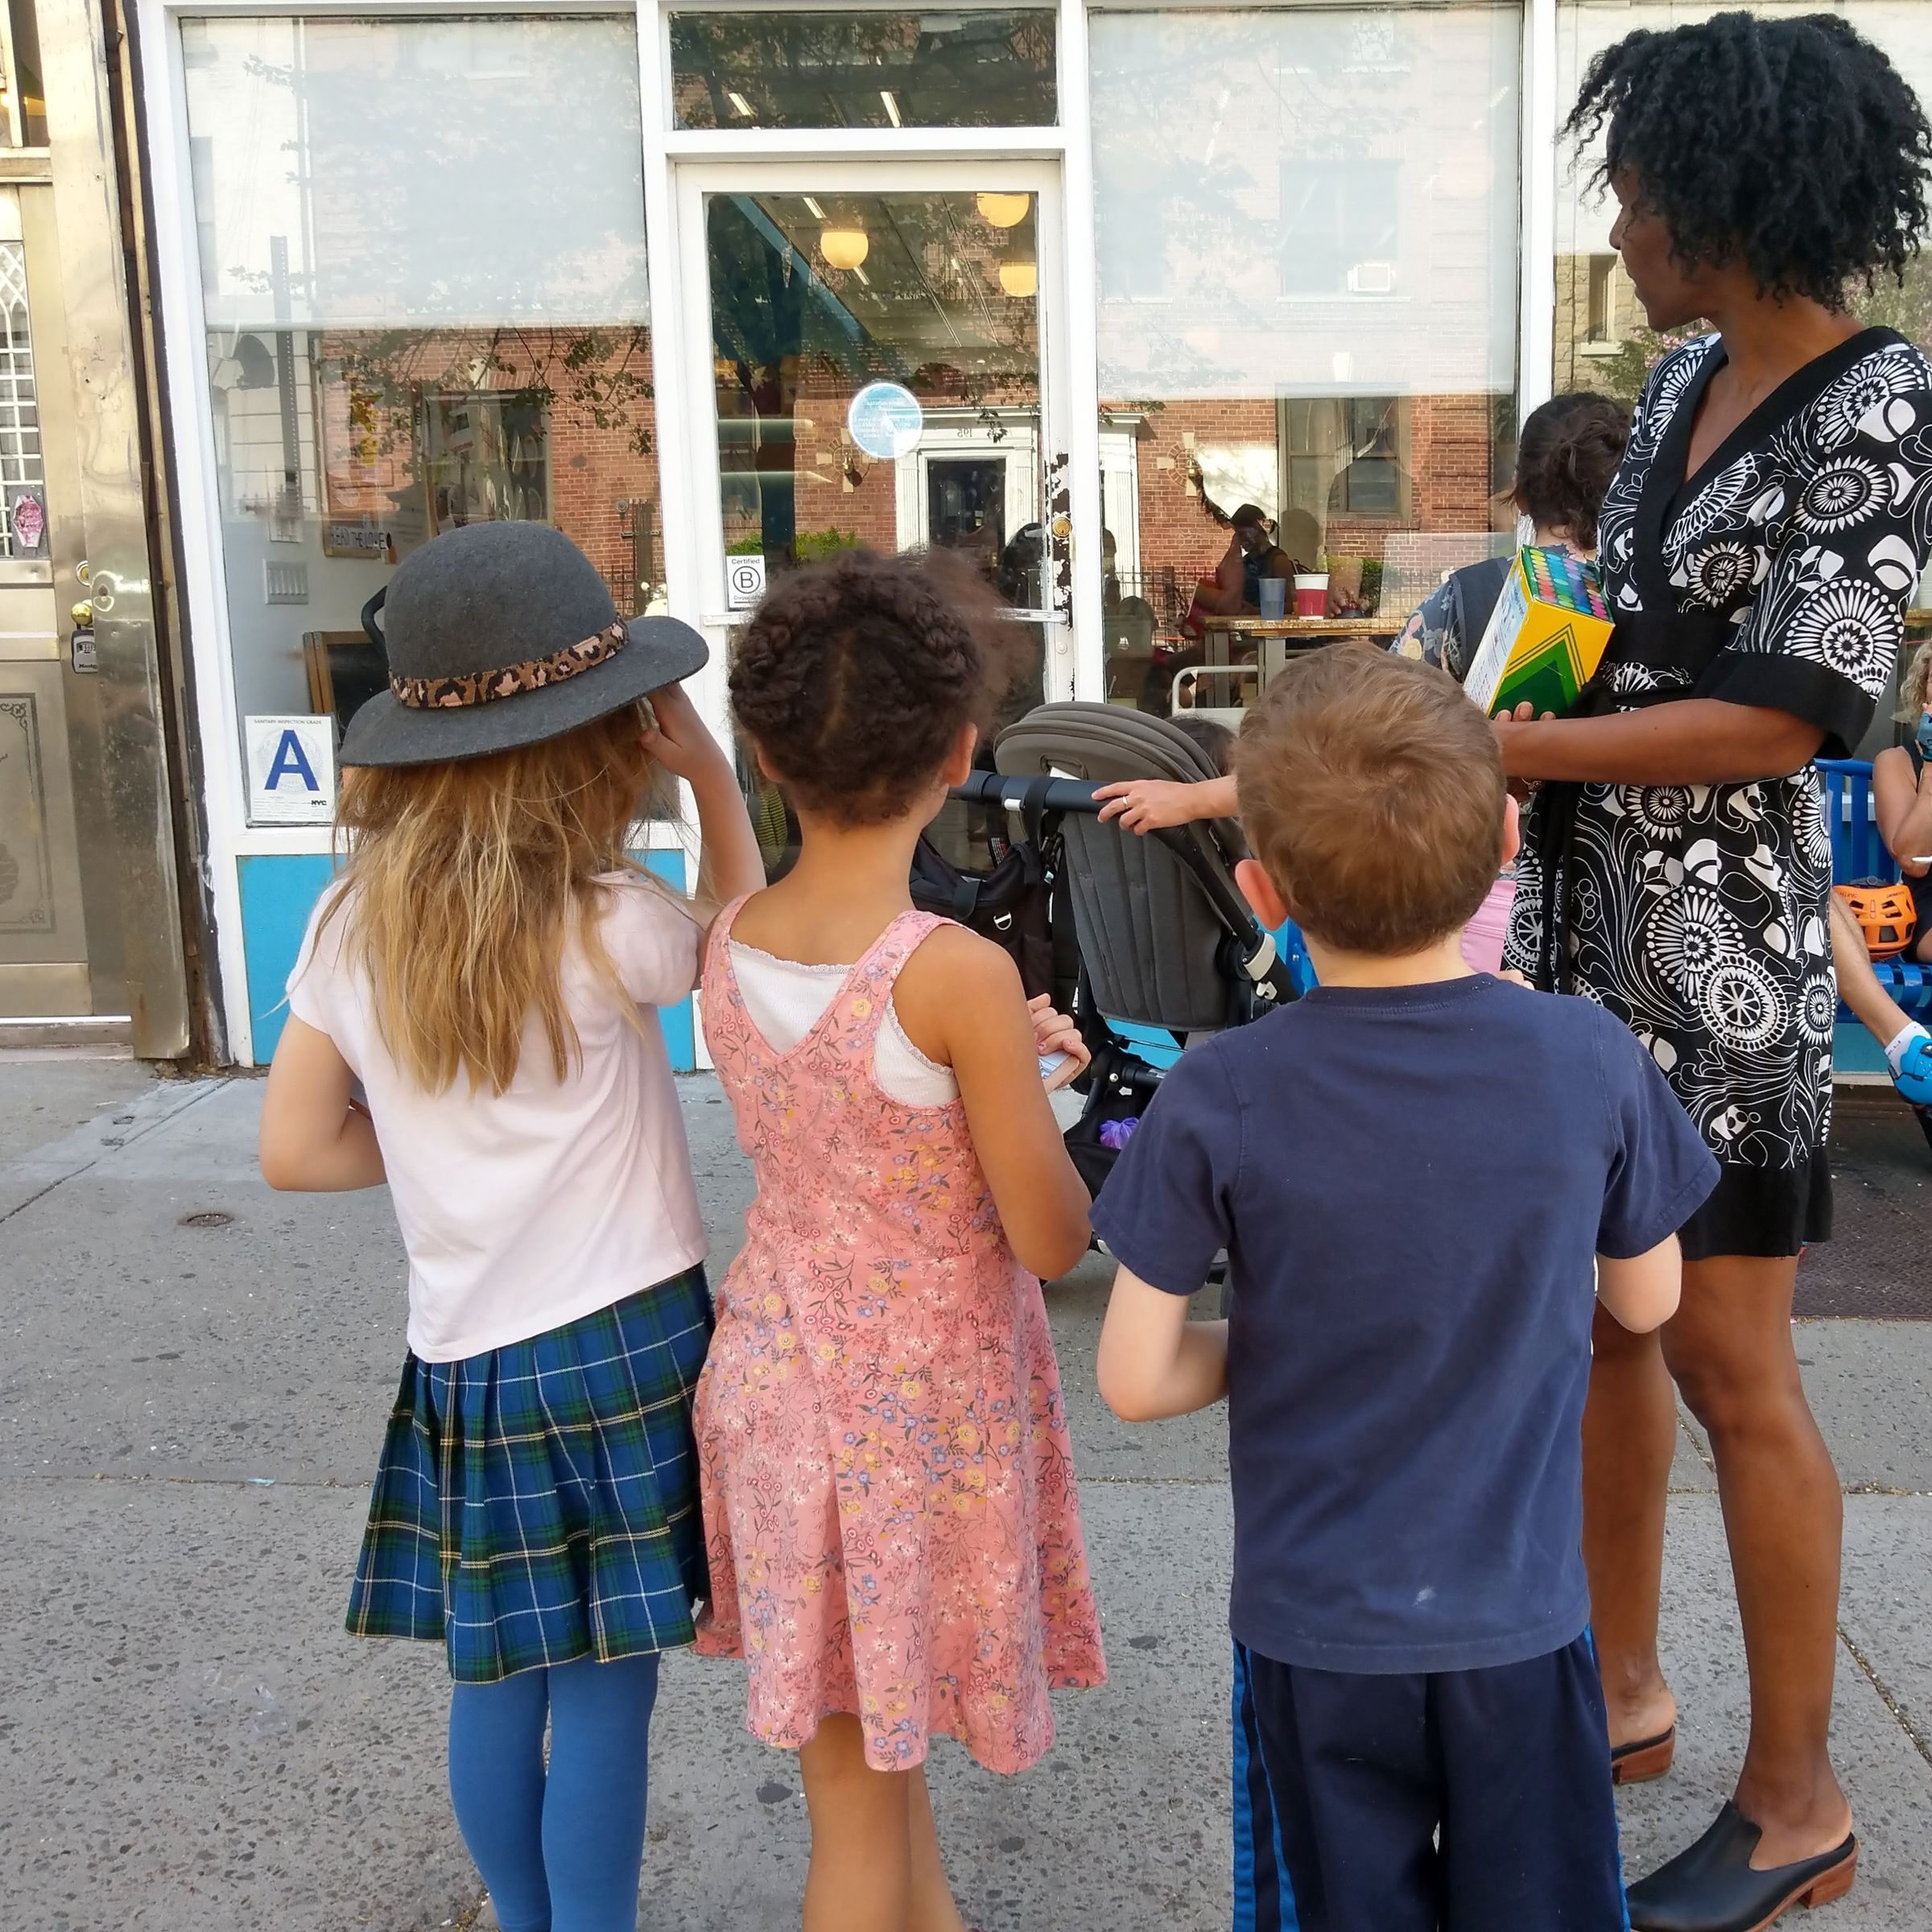 A woman stands in front of a storefront with three children who are all looking at the storefront window